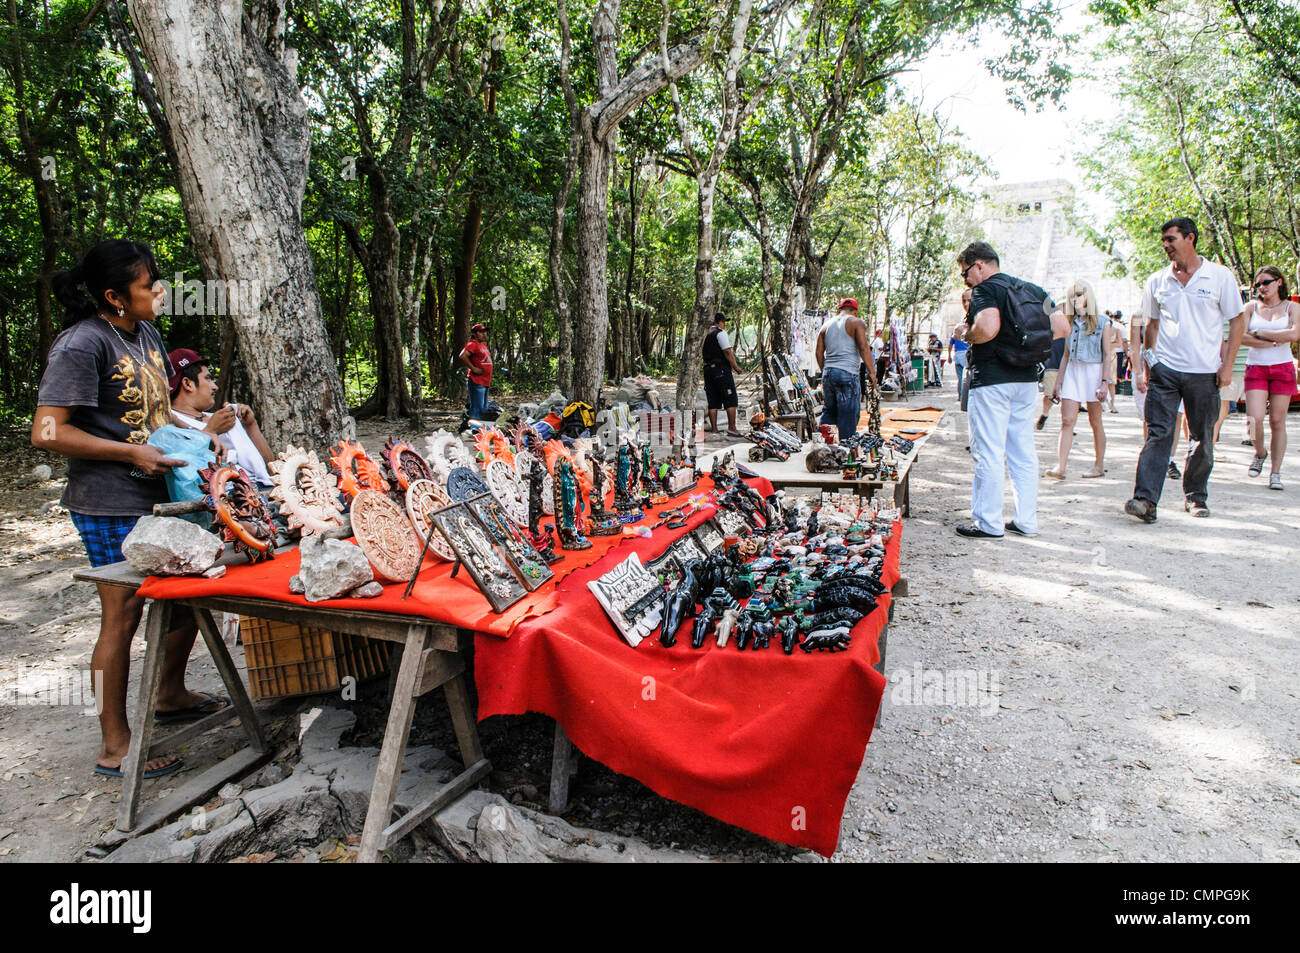 CHICHEN ITZA, Mexico - Tourists shopping at market stalls selling local souvenirs and handicrafts to tourists visiting Chichen Itza Mayan ruins archeological site in Mexico. Stock Photo